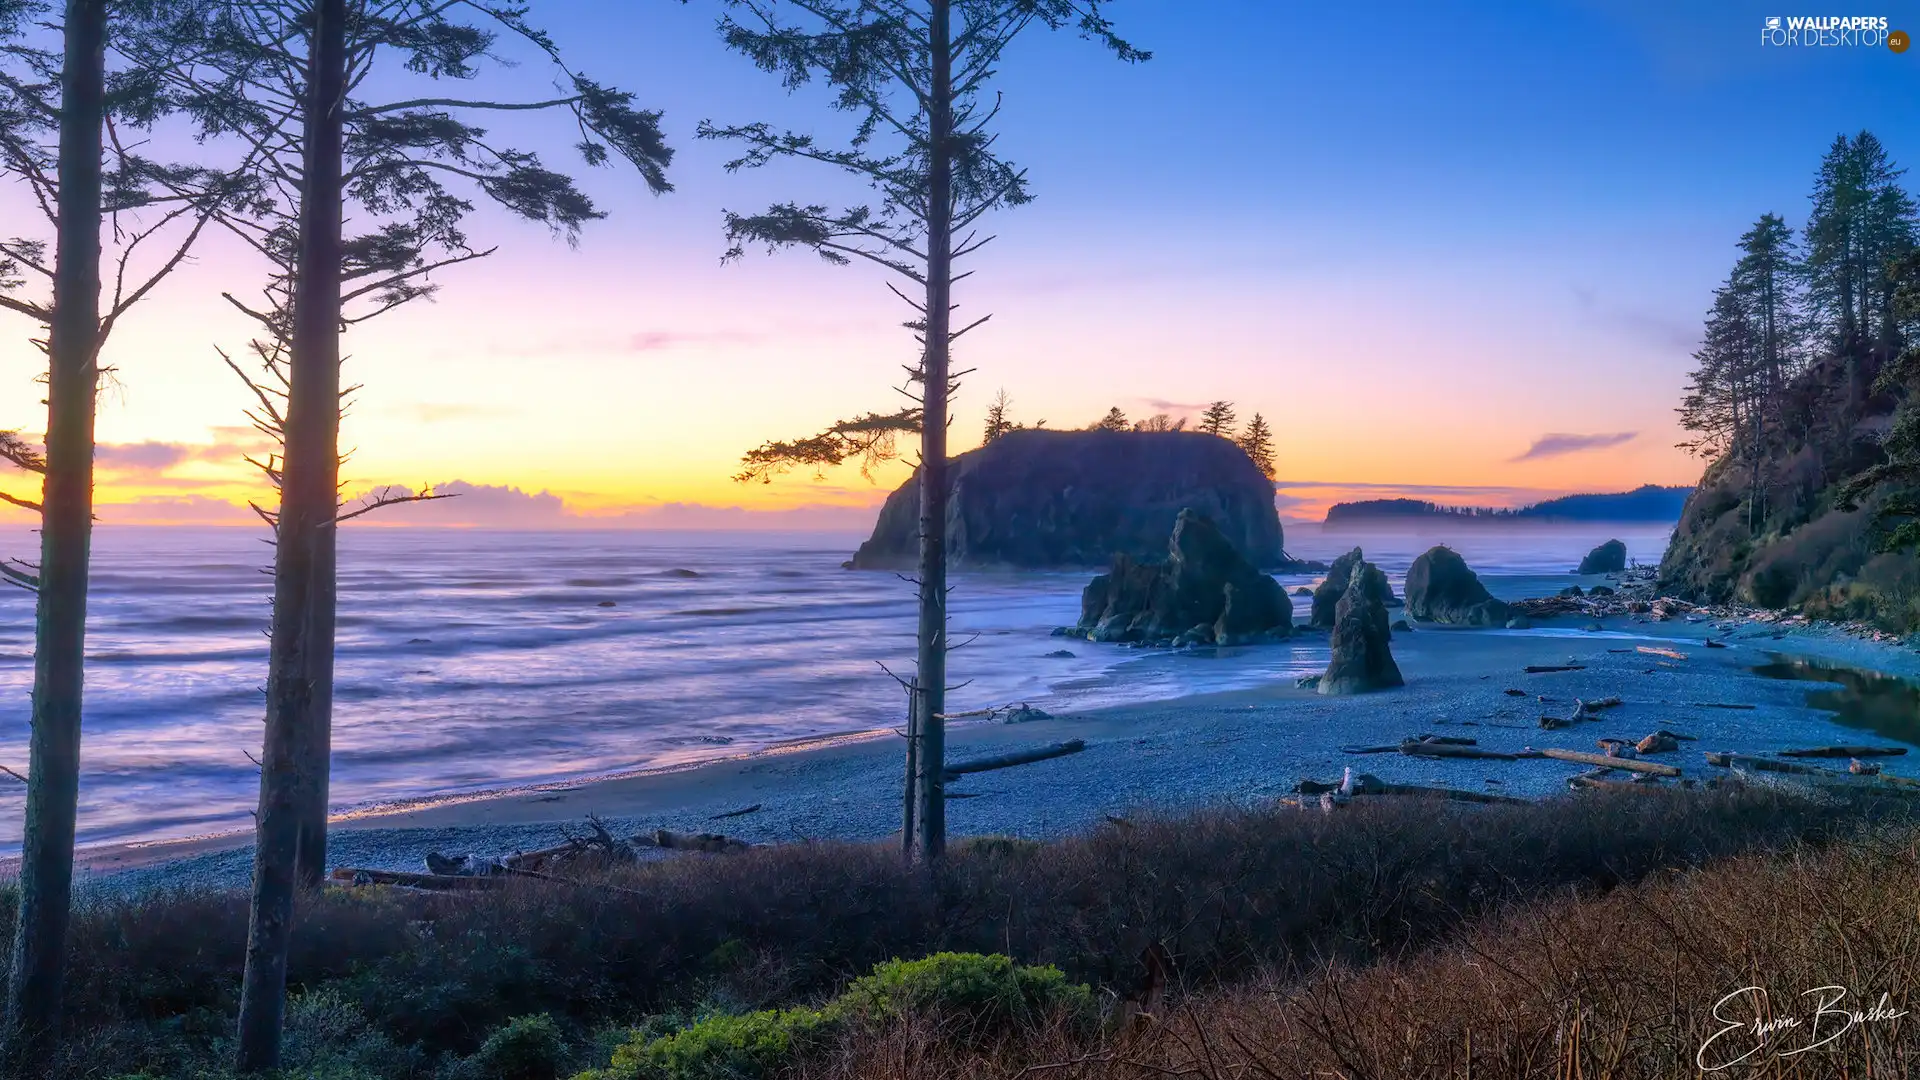 Washington State, The United States, Olympic National Park, Beaches, trees, viewes, Great Sunsets, Islets, Ruby Beach